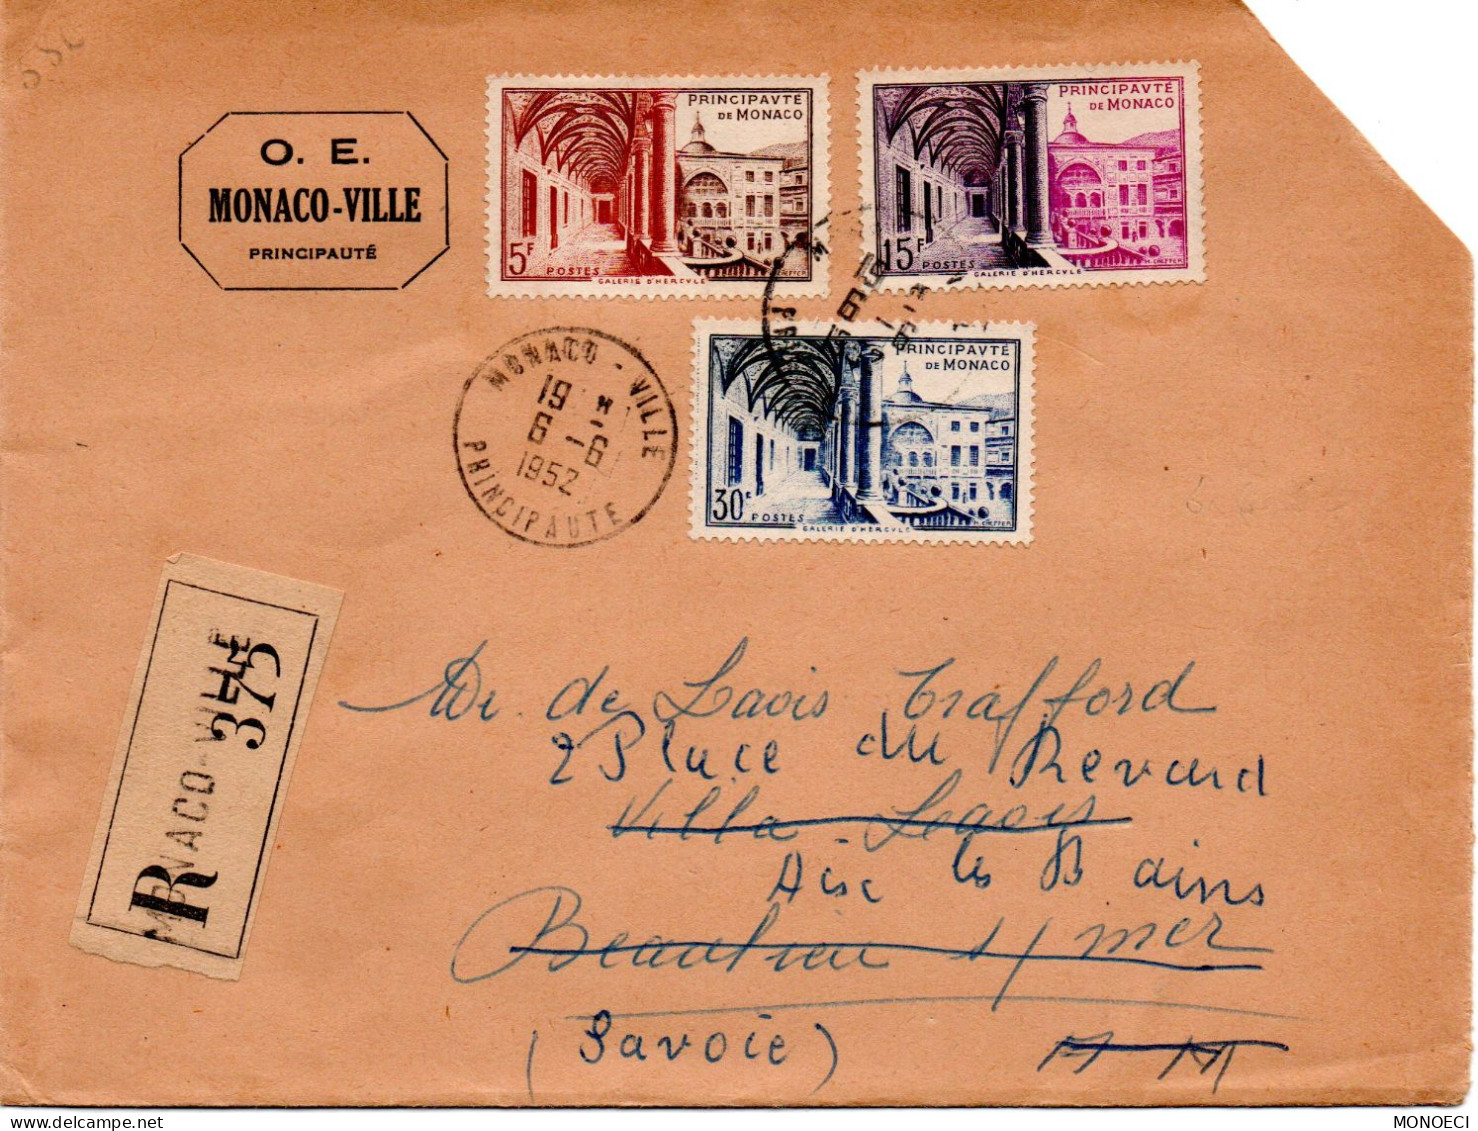 MONACO -- MONTE CARLO -- Enveloppe O.E. -- 3 Timbres Musée Postal Galerie D' Hercule - Used Stamps